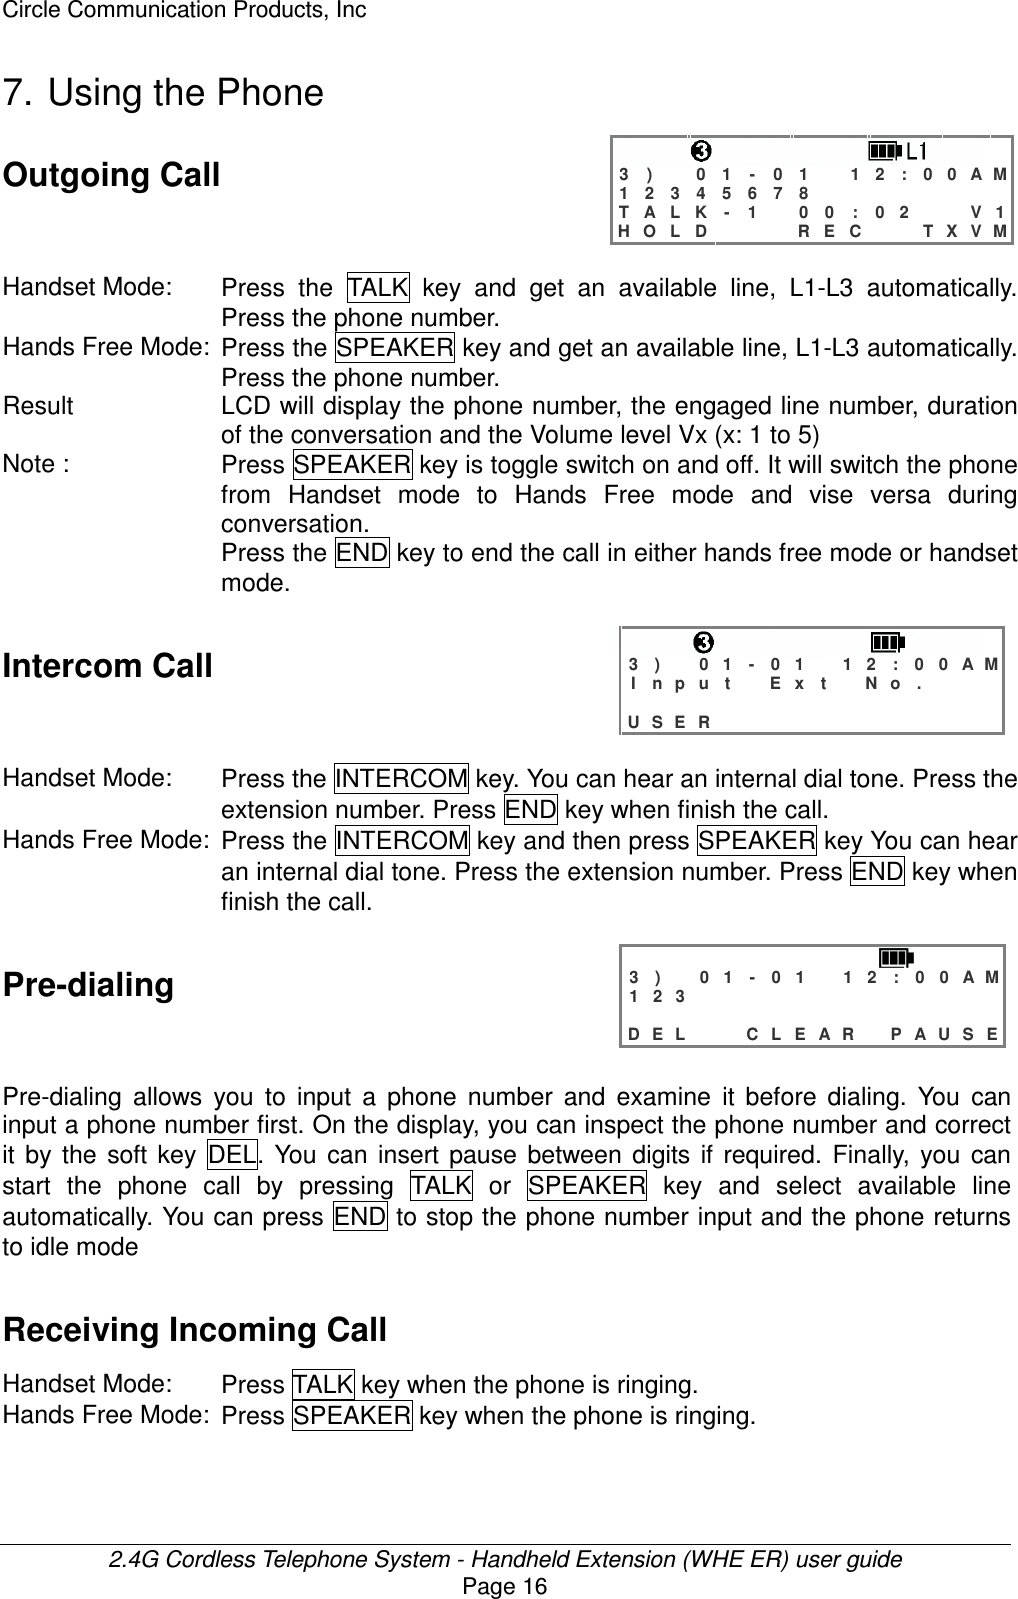 Circle Communication Products, Inc  2.4G Cordless Telephone System - Handheld Extension (WHE ER) user guide Page 16 7. Using the Phone Outgoing Call   3 )   0 1 - 0 1  1 2 : 0 0 A M 1 2 3 4 5 6 7 8         T A L K - 1  0 0 : 0 2   V 1 H O L D    R E C   T X V M  Handset Mode:  Press  the  TALK  key  and  get  an  available  line,  L1-L3  automatically. Press the phone number. Hands Free Mode: Press the SPEAKER key and get an available line, L1-L3 automatically. Press the phone number. Result LCD will display the phone number, the engaged line number, duration of the conversation and the Volume level Vx (x: 1 to 5) Note :  Press SPEAKER key is toggle switch on and off. It will switch the phone from  Handset  mode  to  Hands  Free  mode  and  vise  versa  during conversation. Press the END key to end the call in either hands free mode or handset mode.  Intercom Call   3 )   0 1 - 0 1  1 2 : 0 0 A M I n p u t  E x t  N o .                    U S E R              Handset Mode:  Press the INTERCOM key. You can hear an internal dial tone. Press the extension number. Press END key when finish the call. Hands Free Mode: Press the INTERCOM key and then press SPEAKER key You can hear an internal dial tone. Press the extension number. Press END key when finish the call.  Pre-dialing   3 )   0 1 - 0 1  1 2 : 0 0 A M 1 2 3                              D E L   C L E A R  P A U S E  Pre-dialing  allows  you  to  input  a  phone  number  and  examine  it  before  dialing.  You  can input a phone number first. On the display, you can inspect the phone number and correct it  by  the  soft  key  DEL.  You  can  insert  pause  between  digits  if  required.  Finally,  you  can start  the  phone  call  by  pressing  TALK  or  SPEAKER  key  and  select  available  line automatically. You can press END to stop the phone number input and the phone returns to idle mode Receiving Incoming Call  Handset Mode:  Press TALK key when the phone is ringing. Hands Free Mode: Press SPEAKER key when the phone is ringing.  